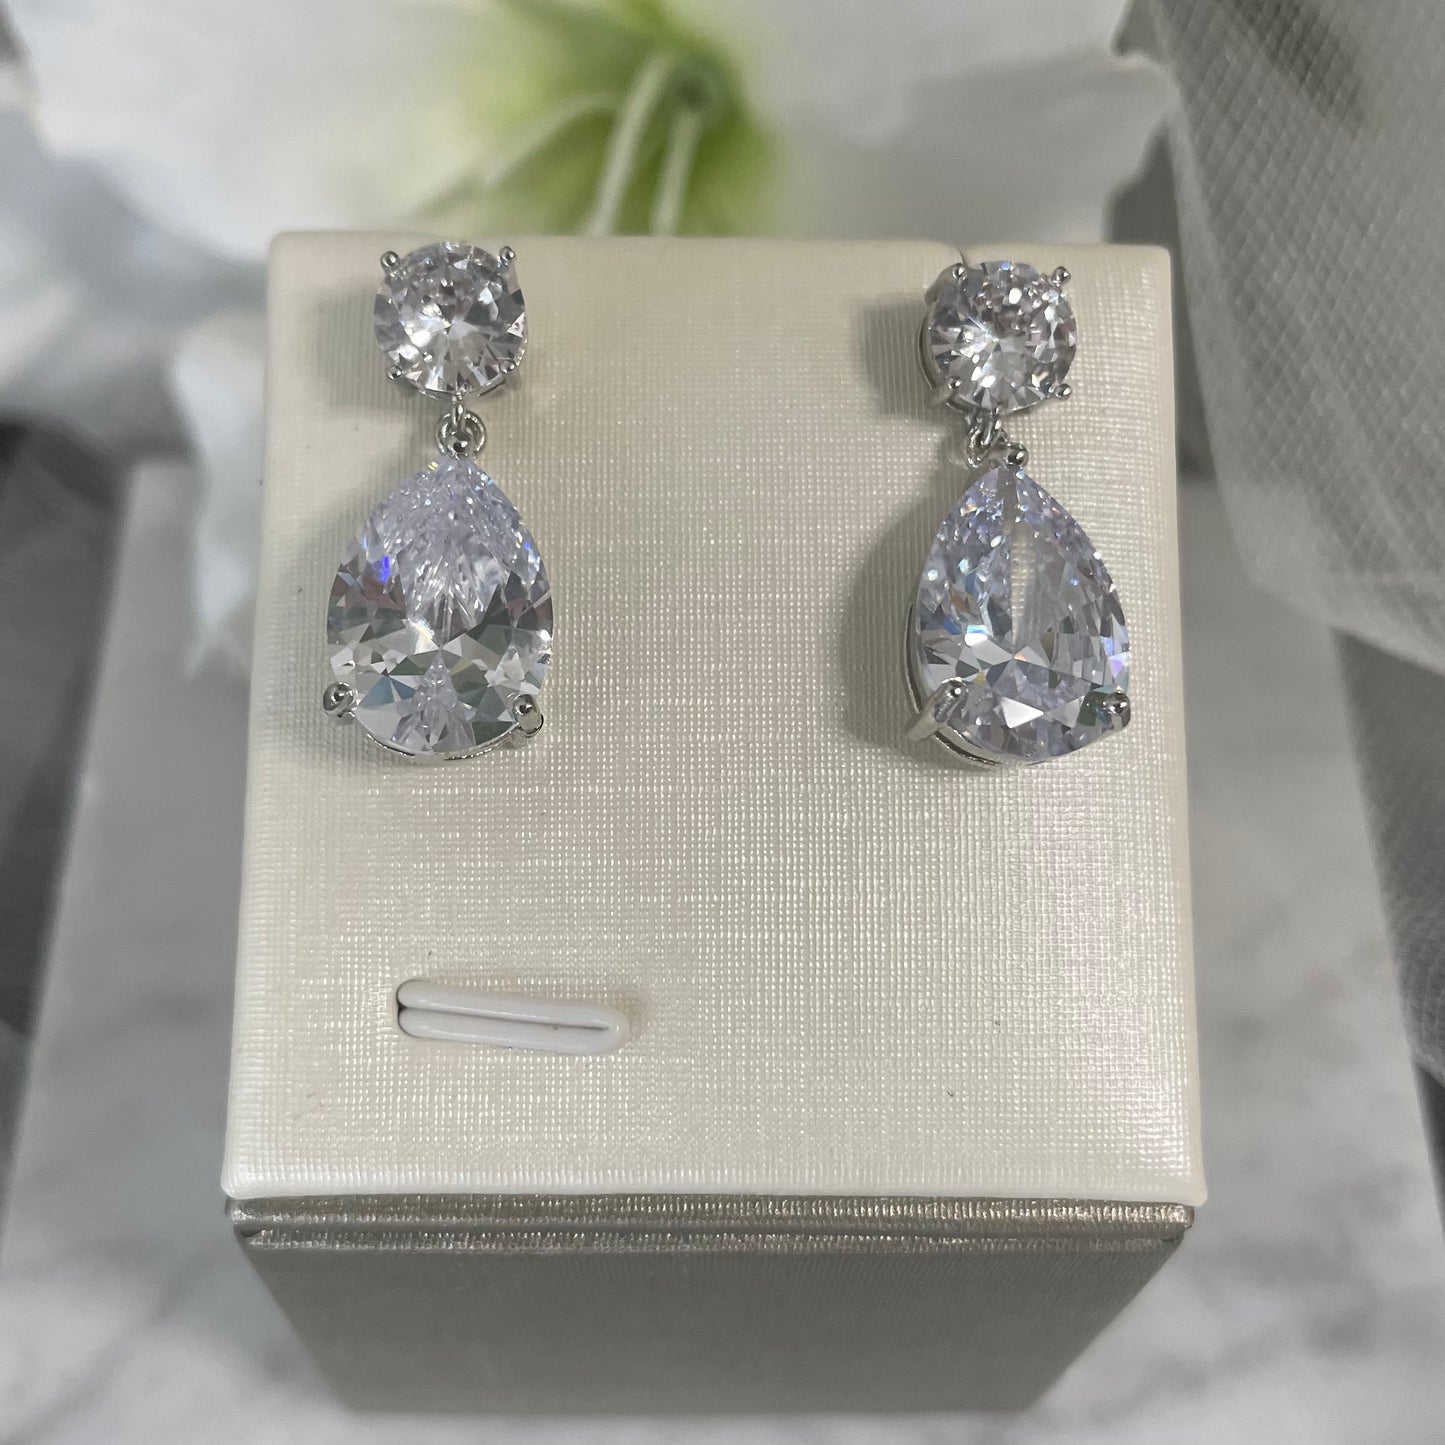 Sparkling Zoe Diamante Silver CZ Pear Shaped Drop Earrings featuring two distinct-sized cubic zirconia stones hanging from a small round CZ stone.